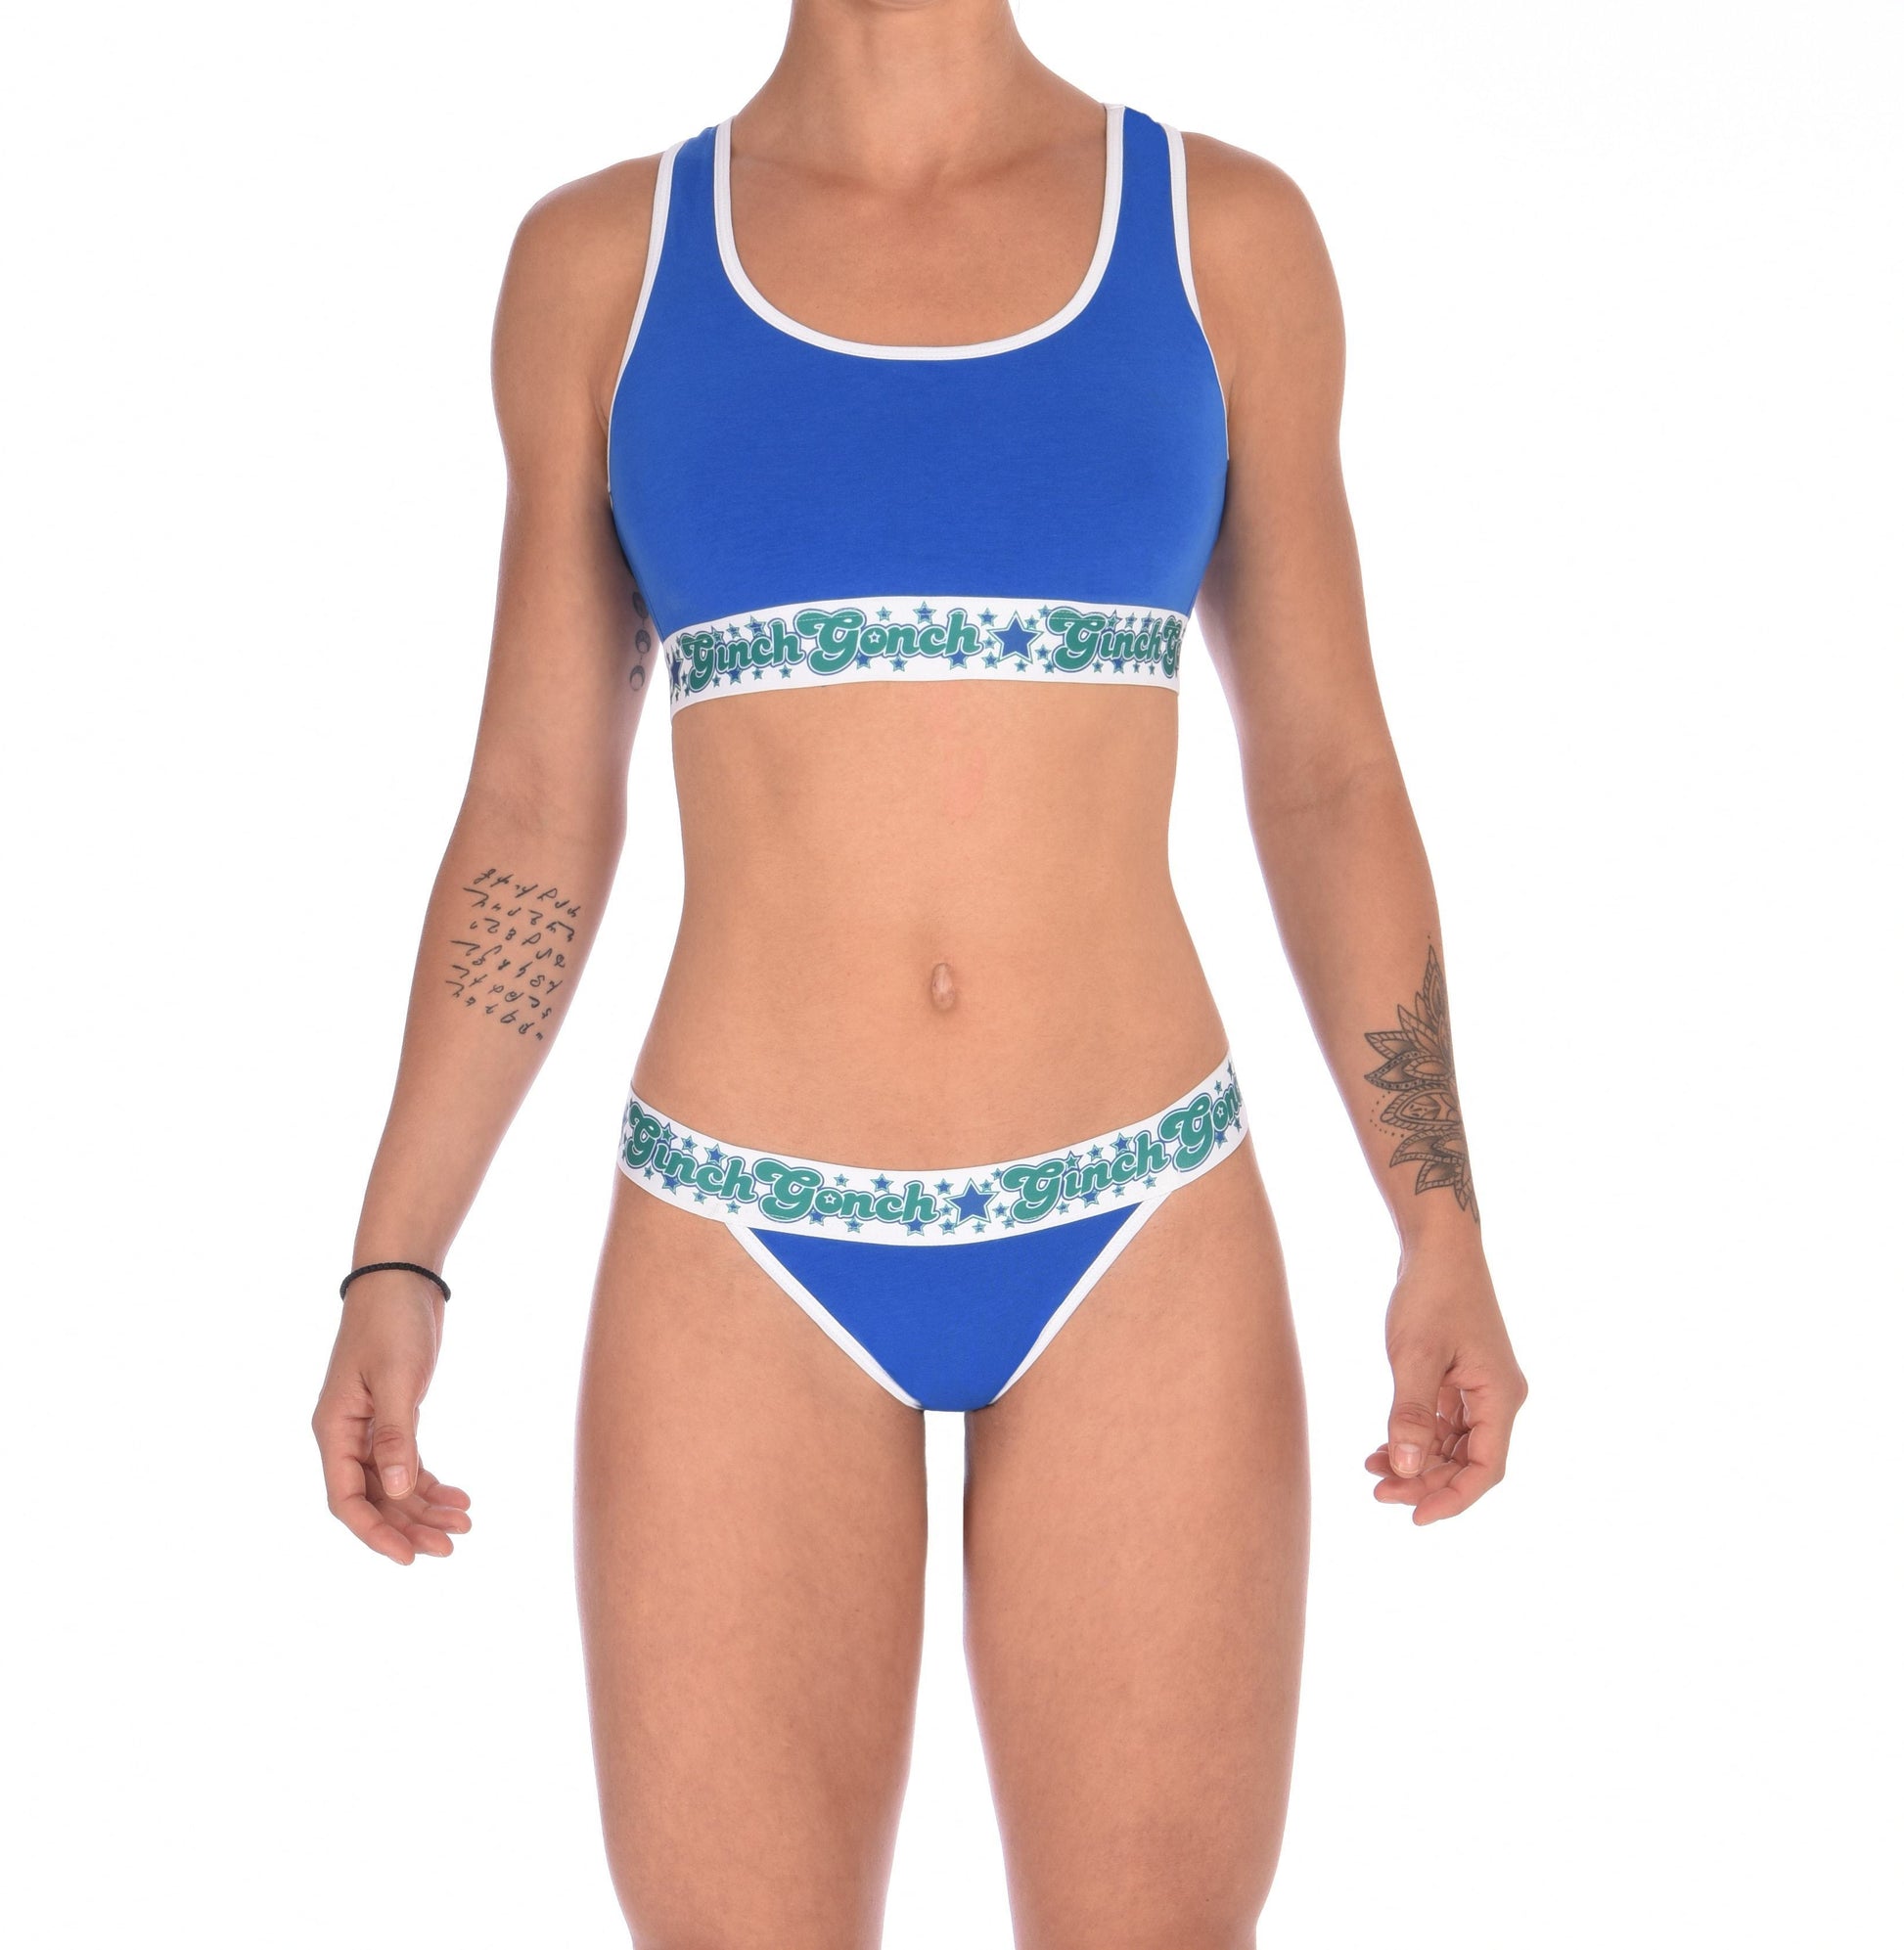 ginch gonch blue lagoon women's thong underwear blue fabric with white trim printed thick waistband with ginch gonch logo and stars in blue and green front shown with matching sports bra